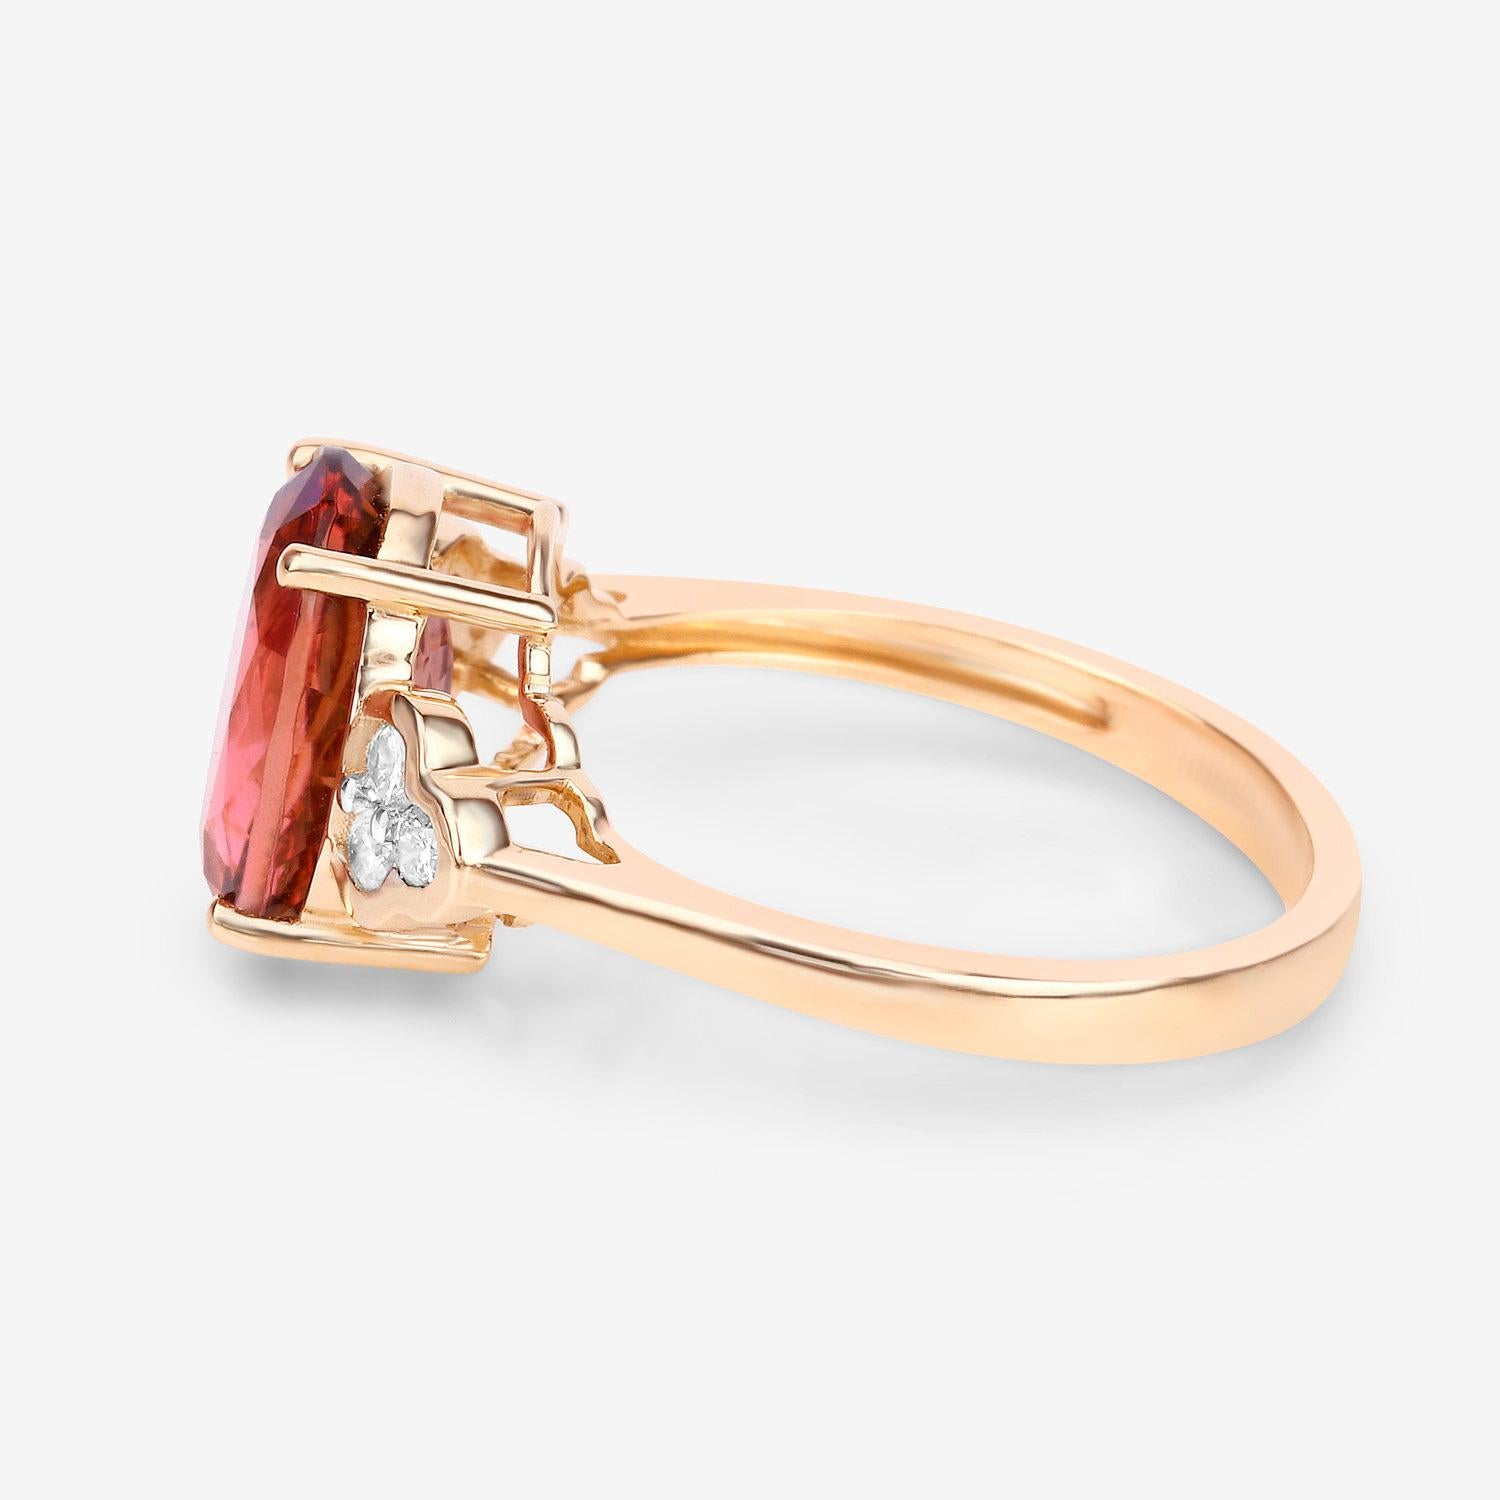 Women's Raspberry Pink Tourmaline Cocktail Ring With Diamonds Total 3.30 Carats 14K Gold For Sale